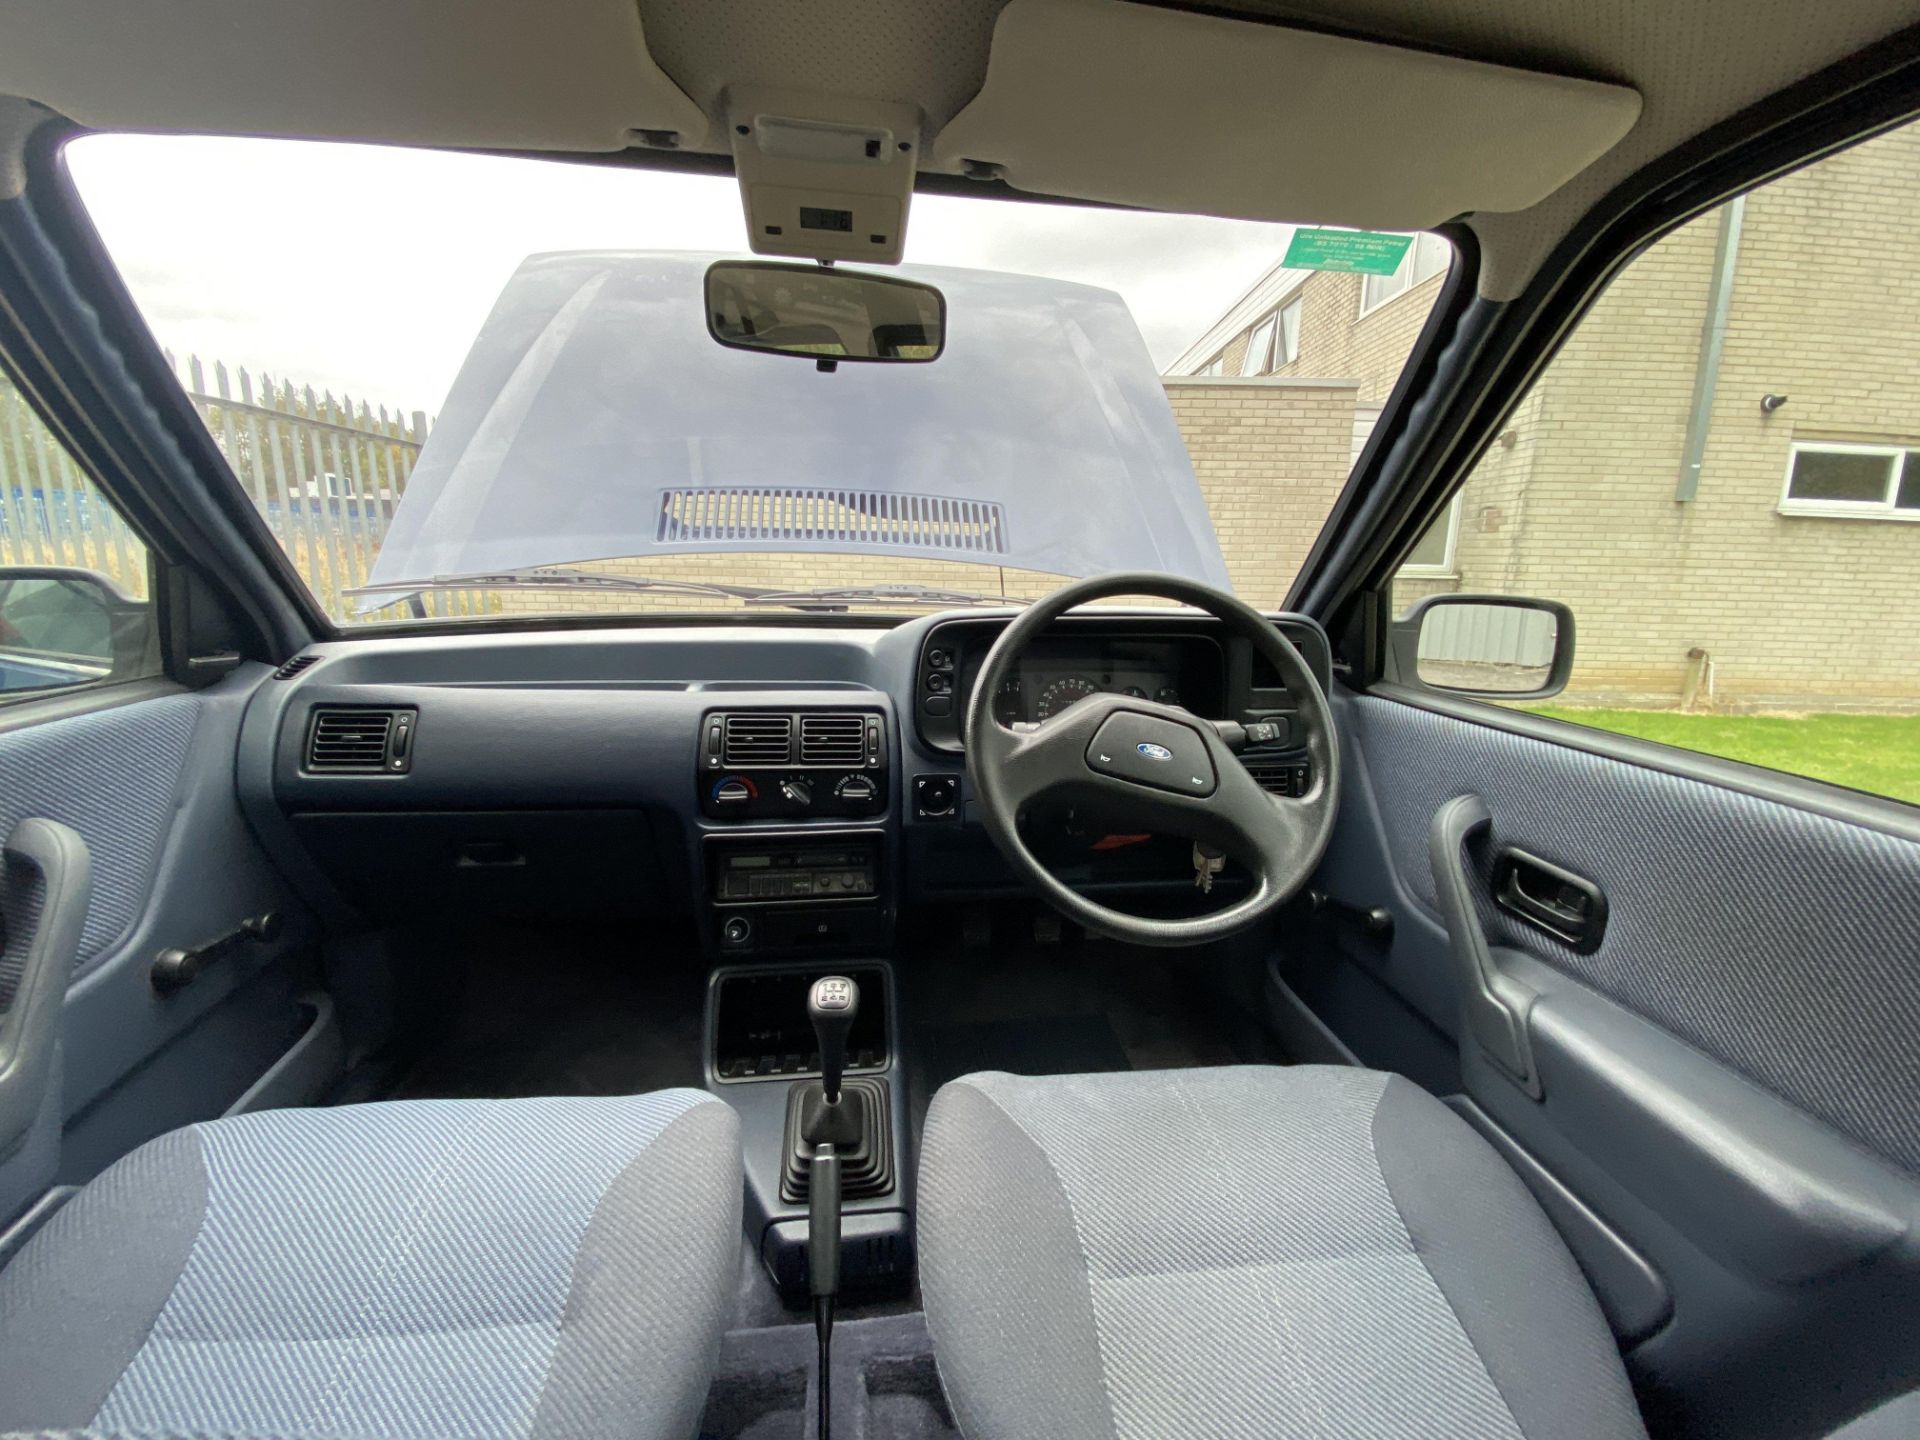 Ford Orion 1.6 GL - Image 33 of 42